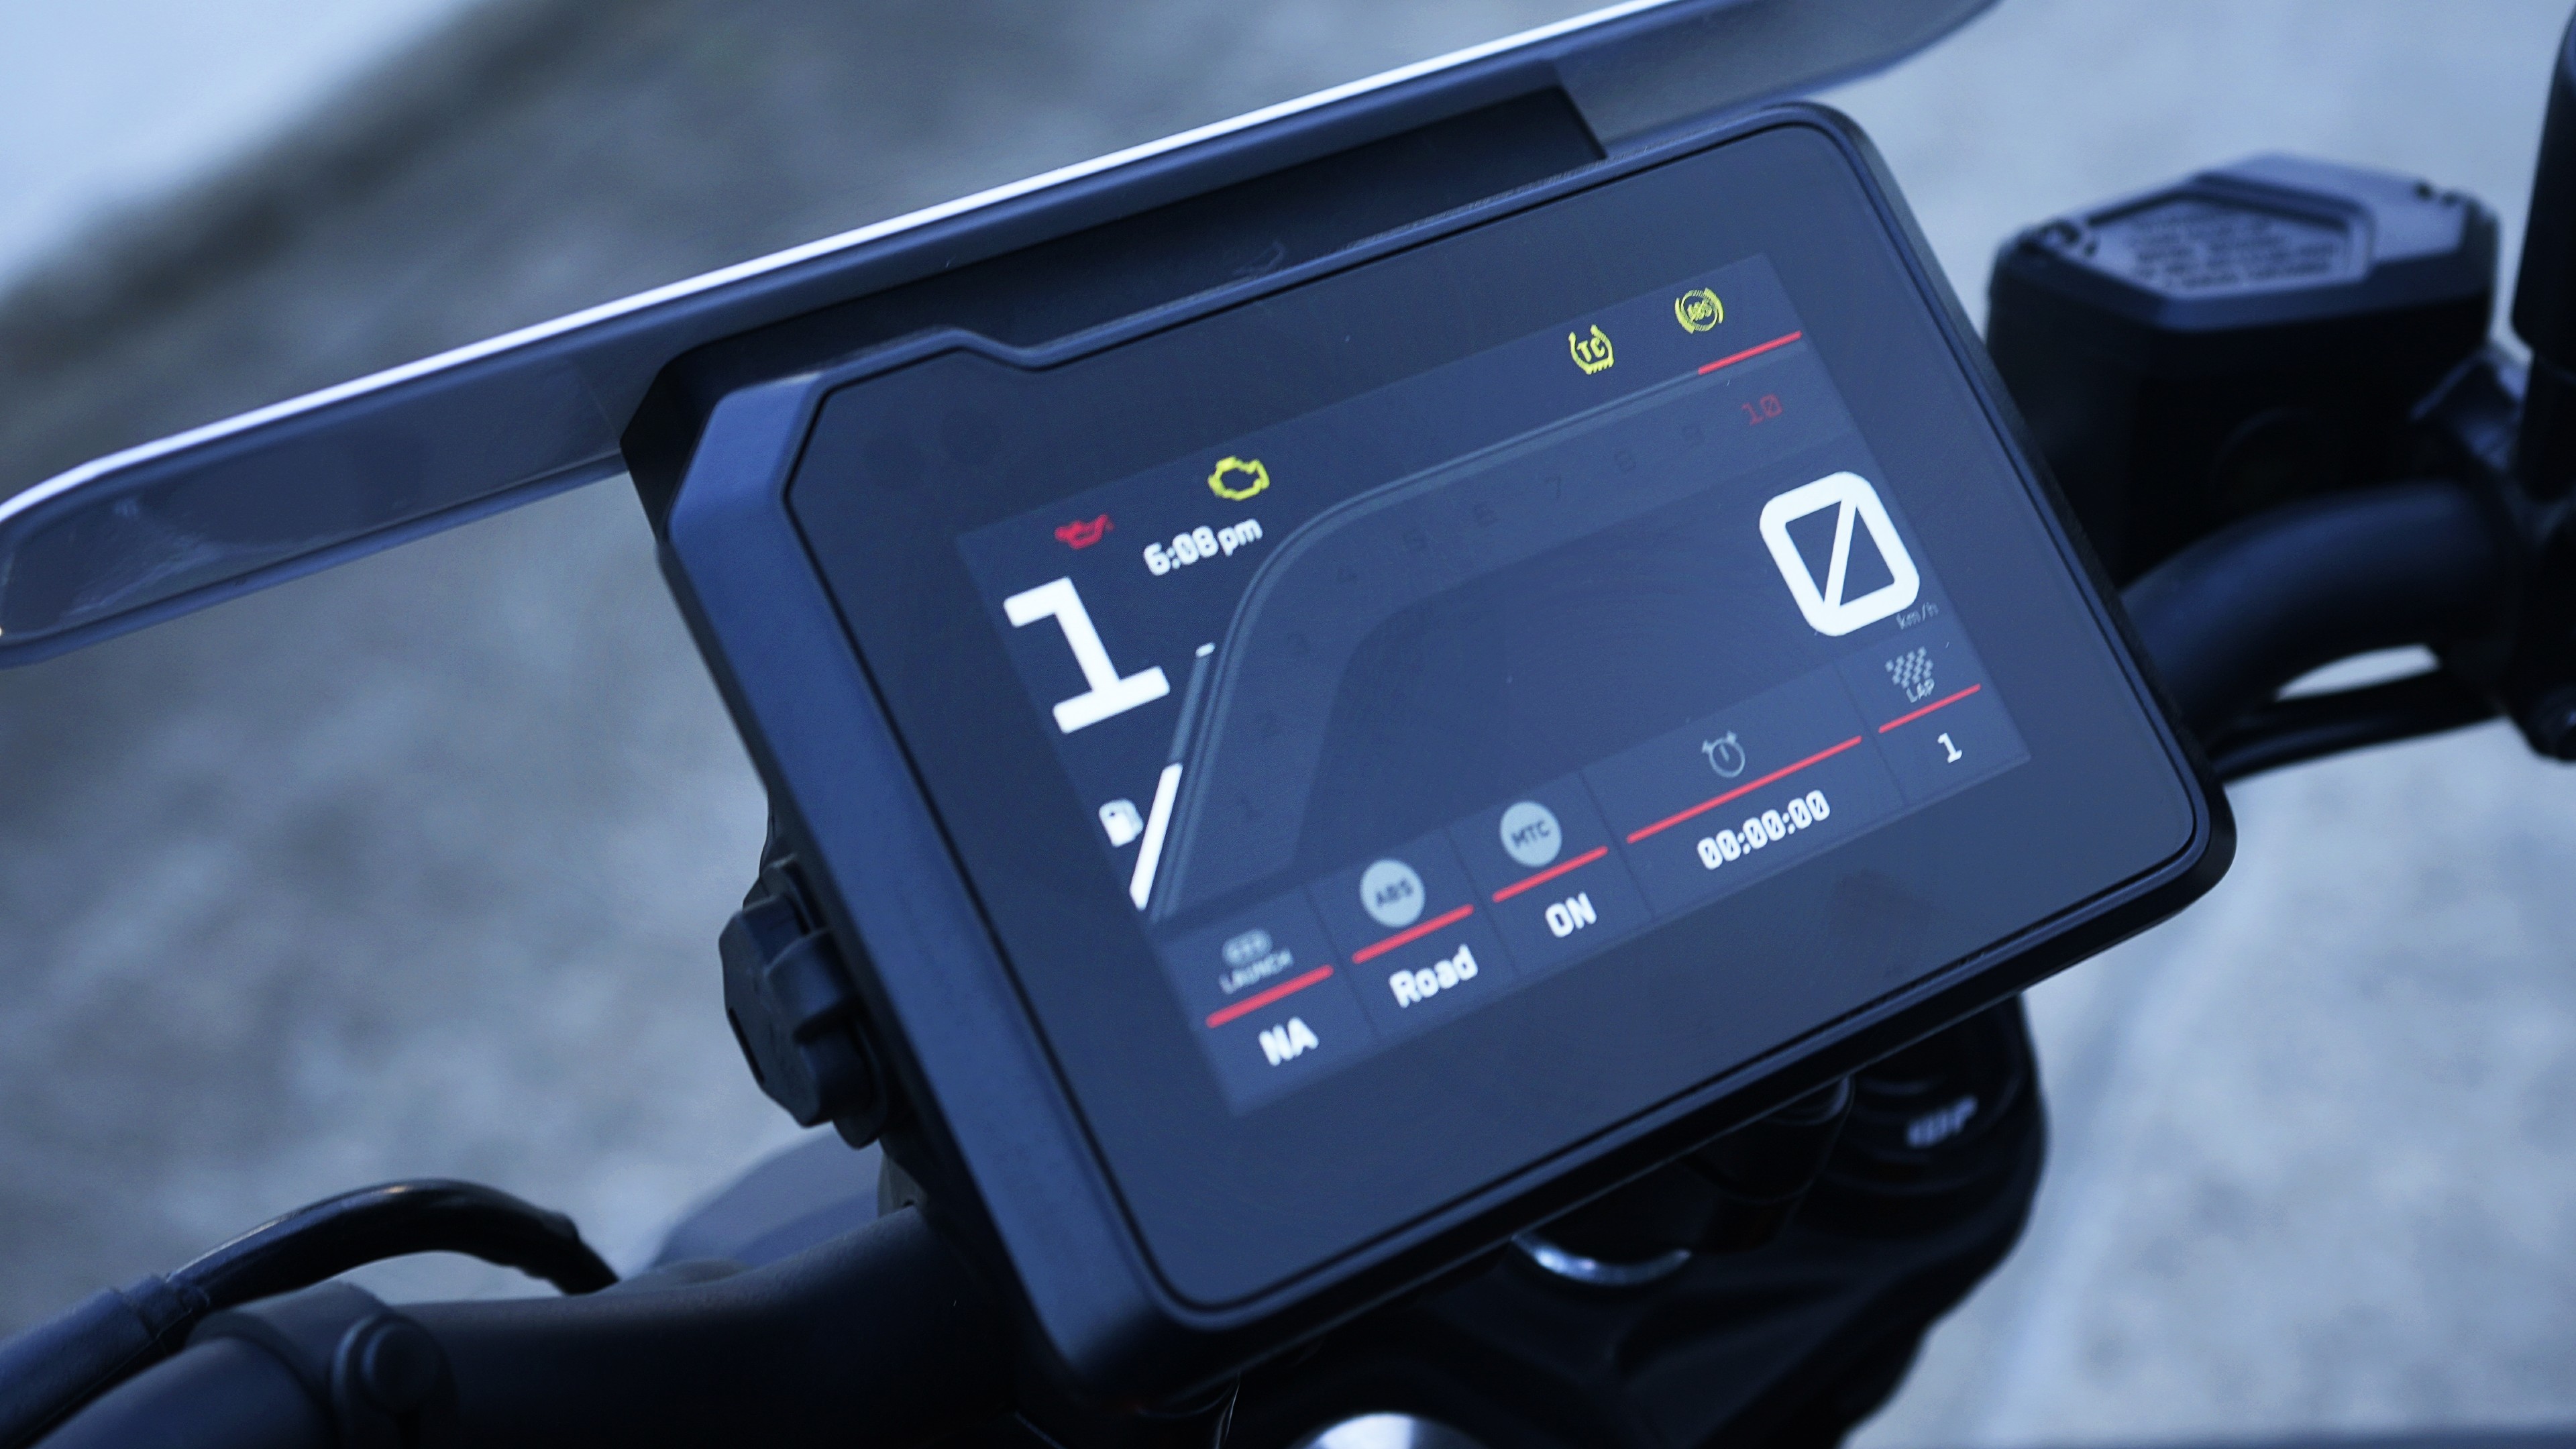 The 5-inch TFT screen on the new 390 Duke comes with a dedicated display for the Track mode that shows a lap timer. The unit also gets Bluetooth connectivity with turn-by-turn navigation